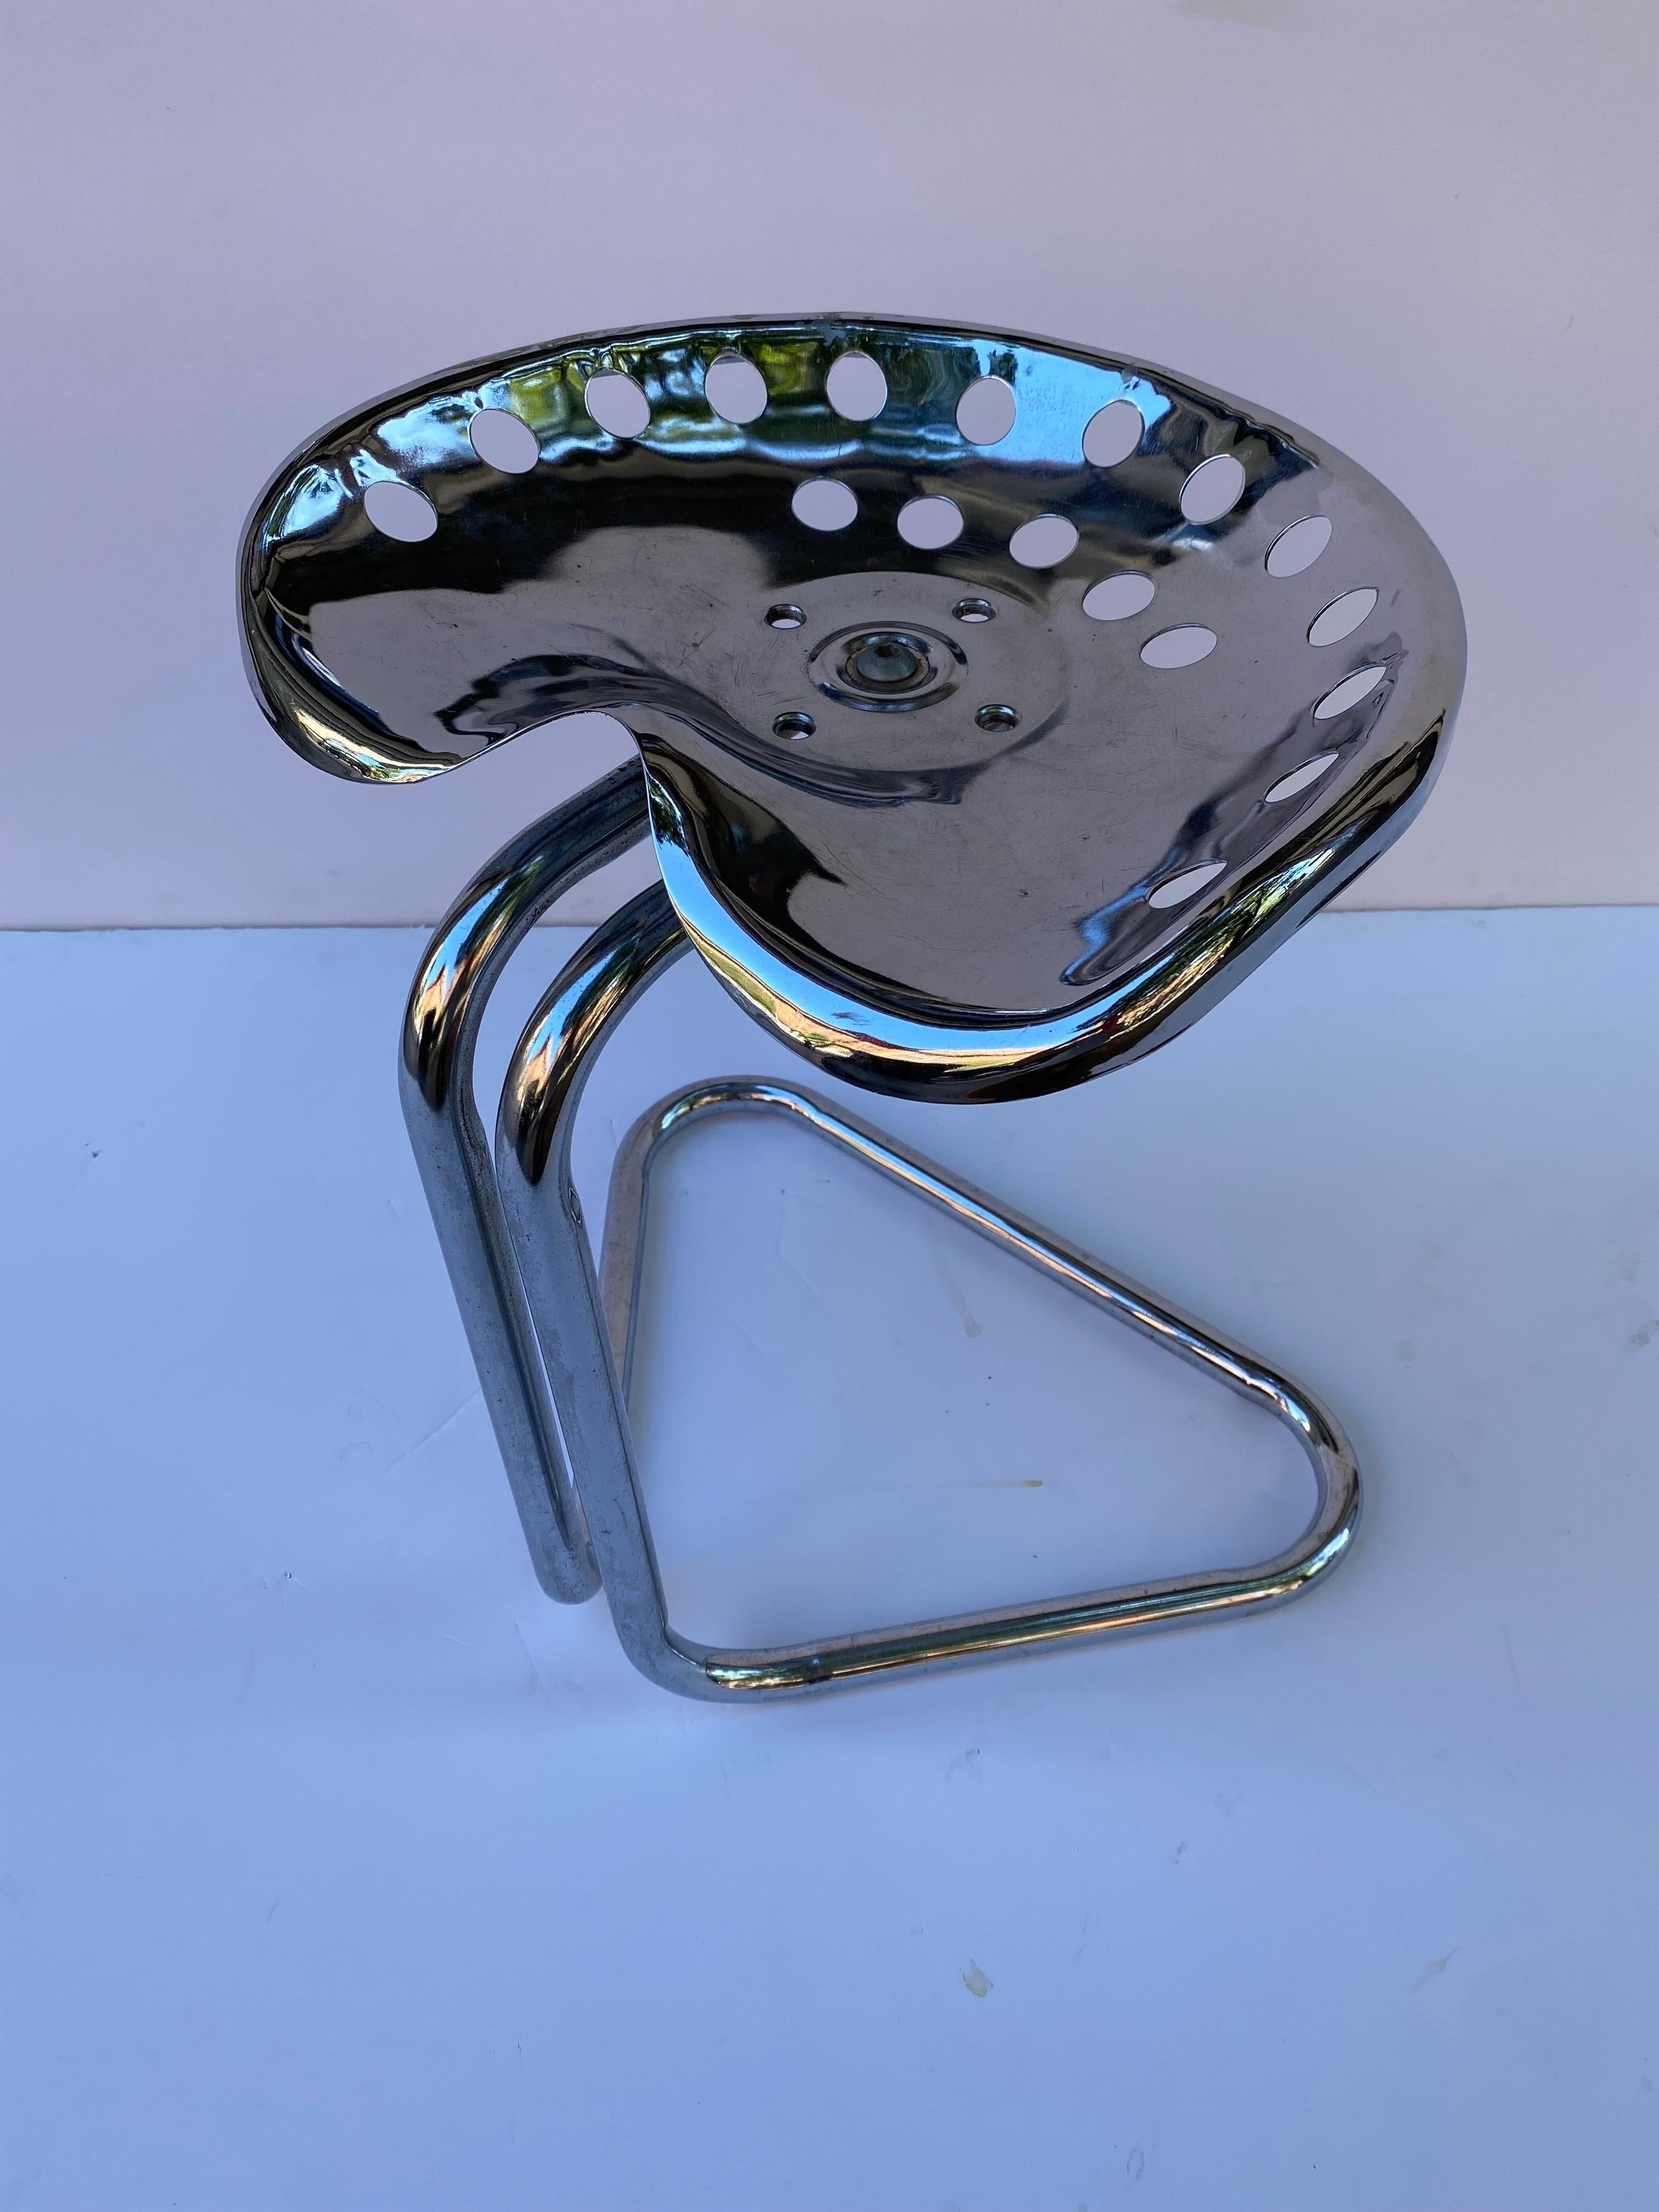 Unique Tractor seat stool. Chrome finish with a tubular triangular designed base and Tractor Seat. Sits sturdy! Nice accent piece to any room!.